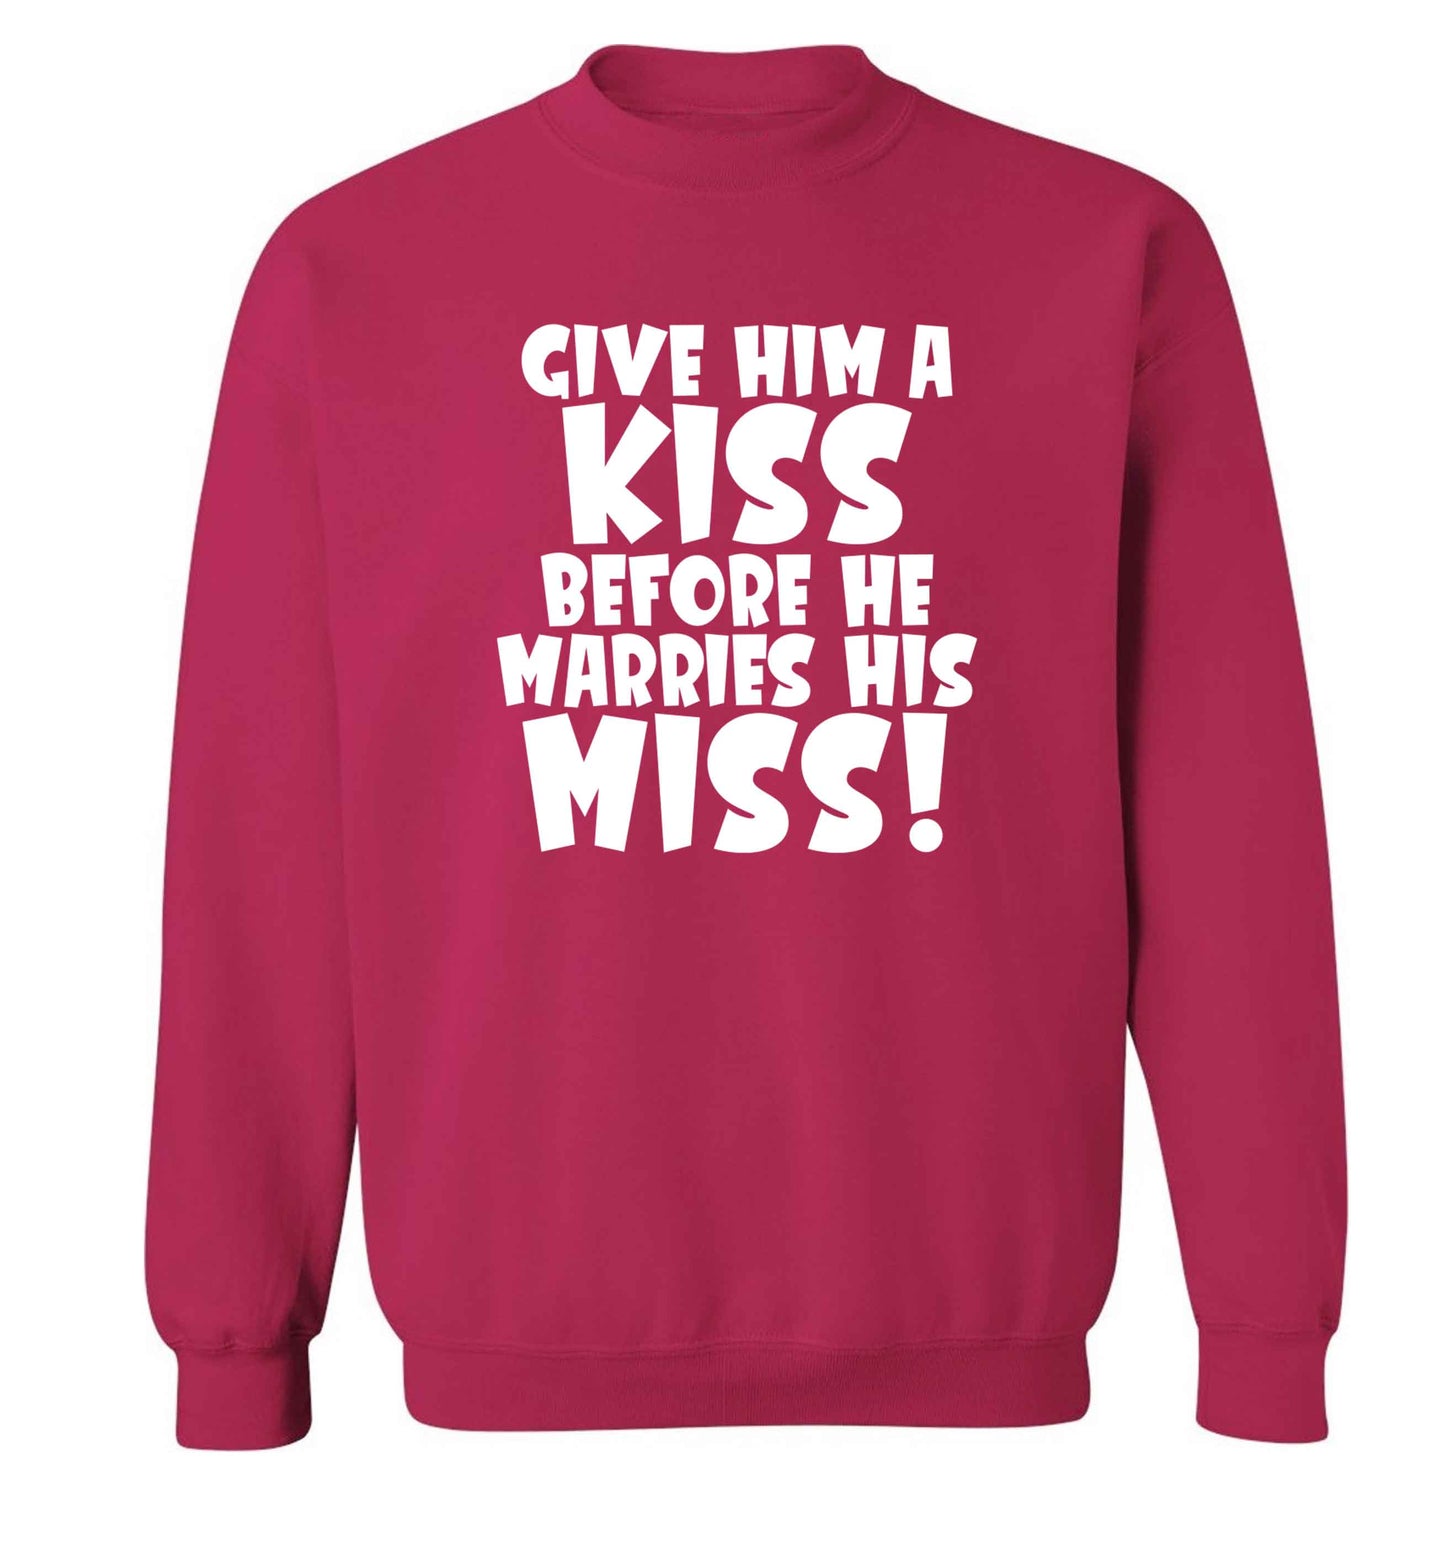 Give him a kiss before he marries his miss adult's unisex pink sweater 2XL